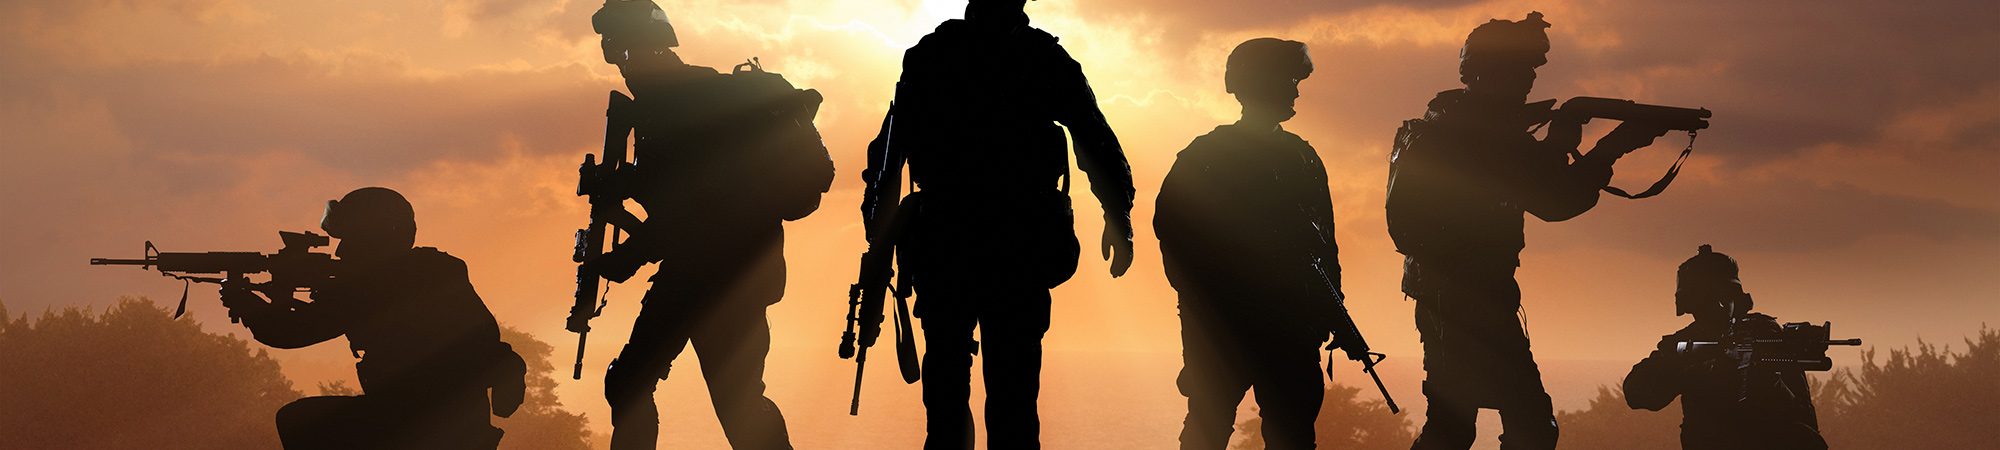 soldiers in silhouette